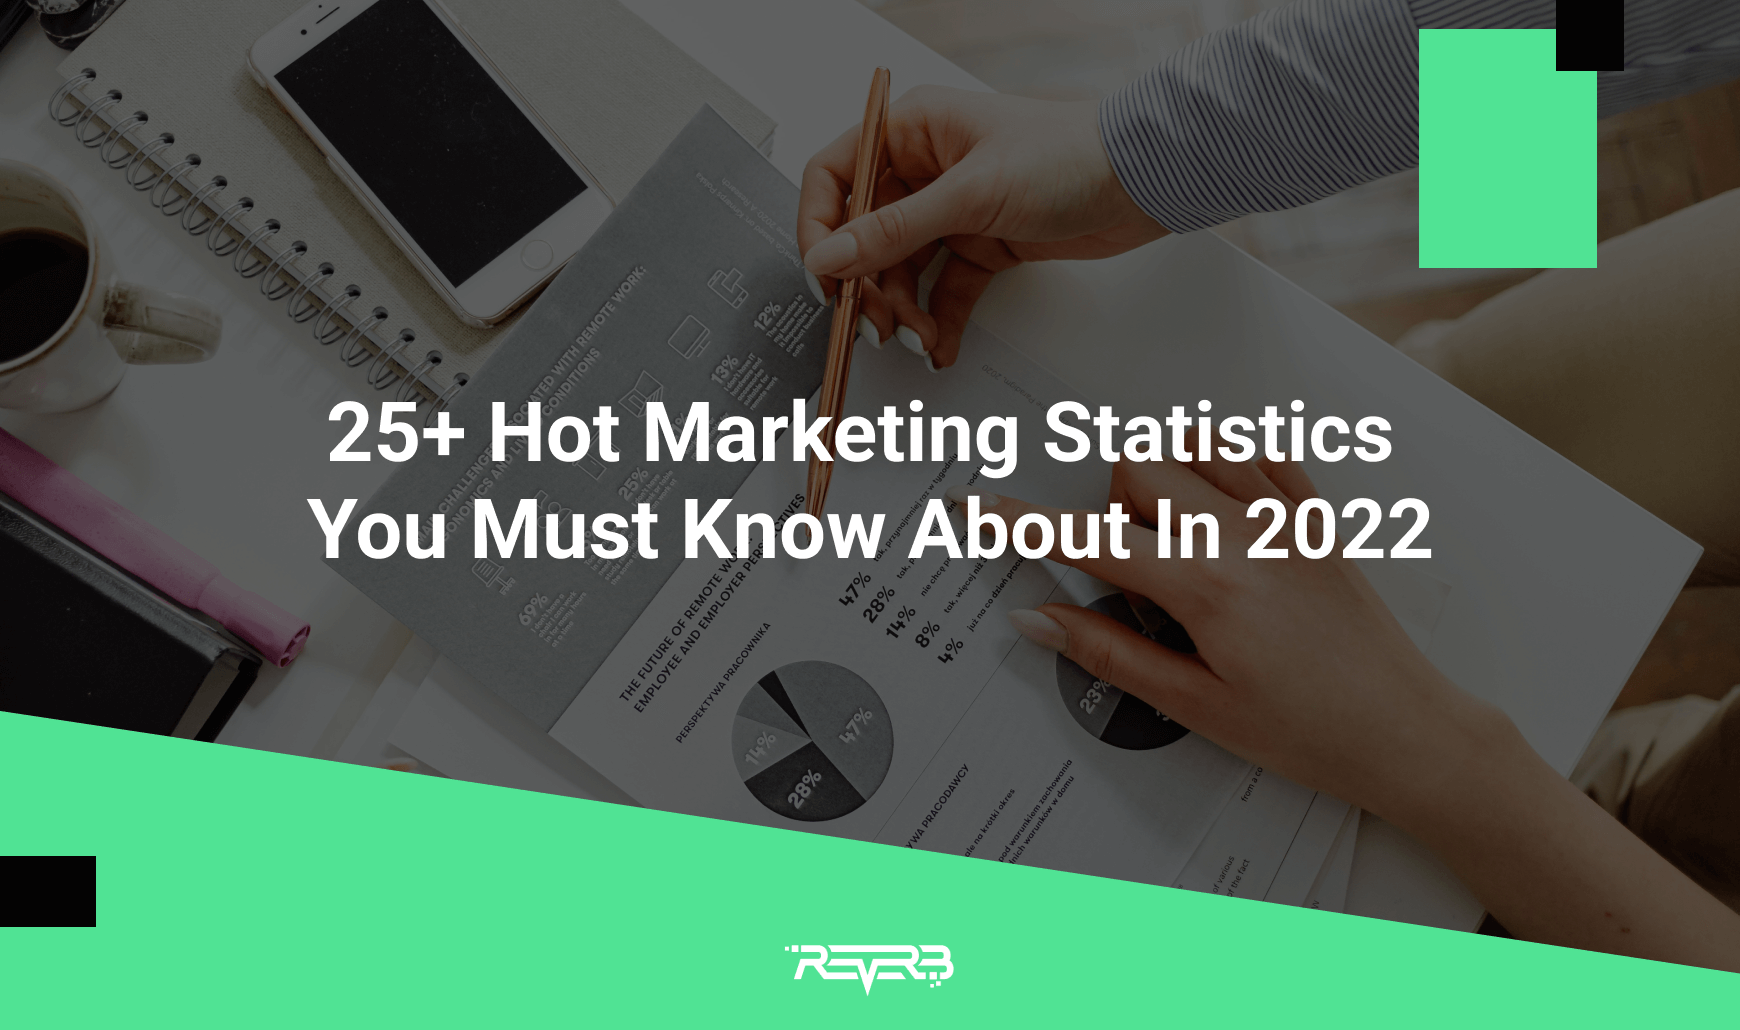 25+ Hot Digital Marketing Statistics You Must Know About In 2022 | REVERB